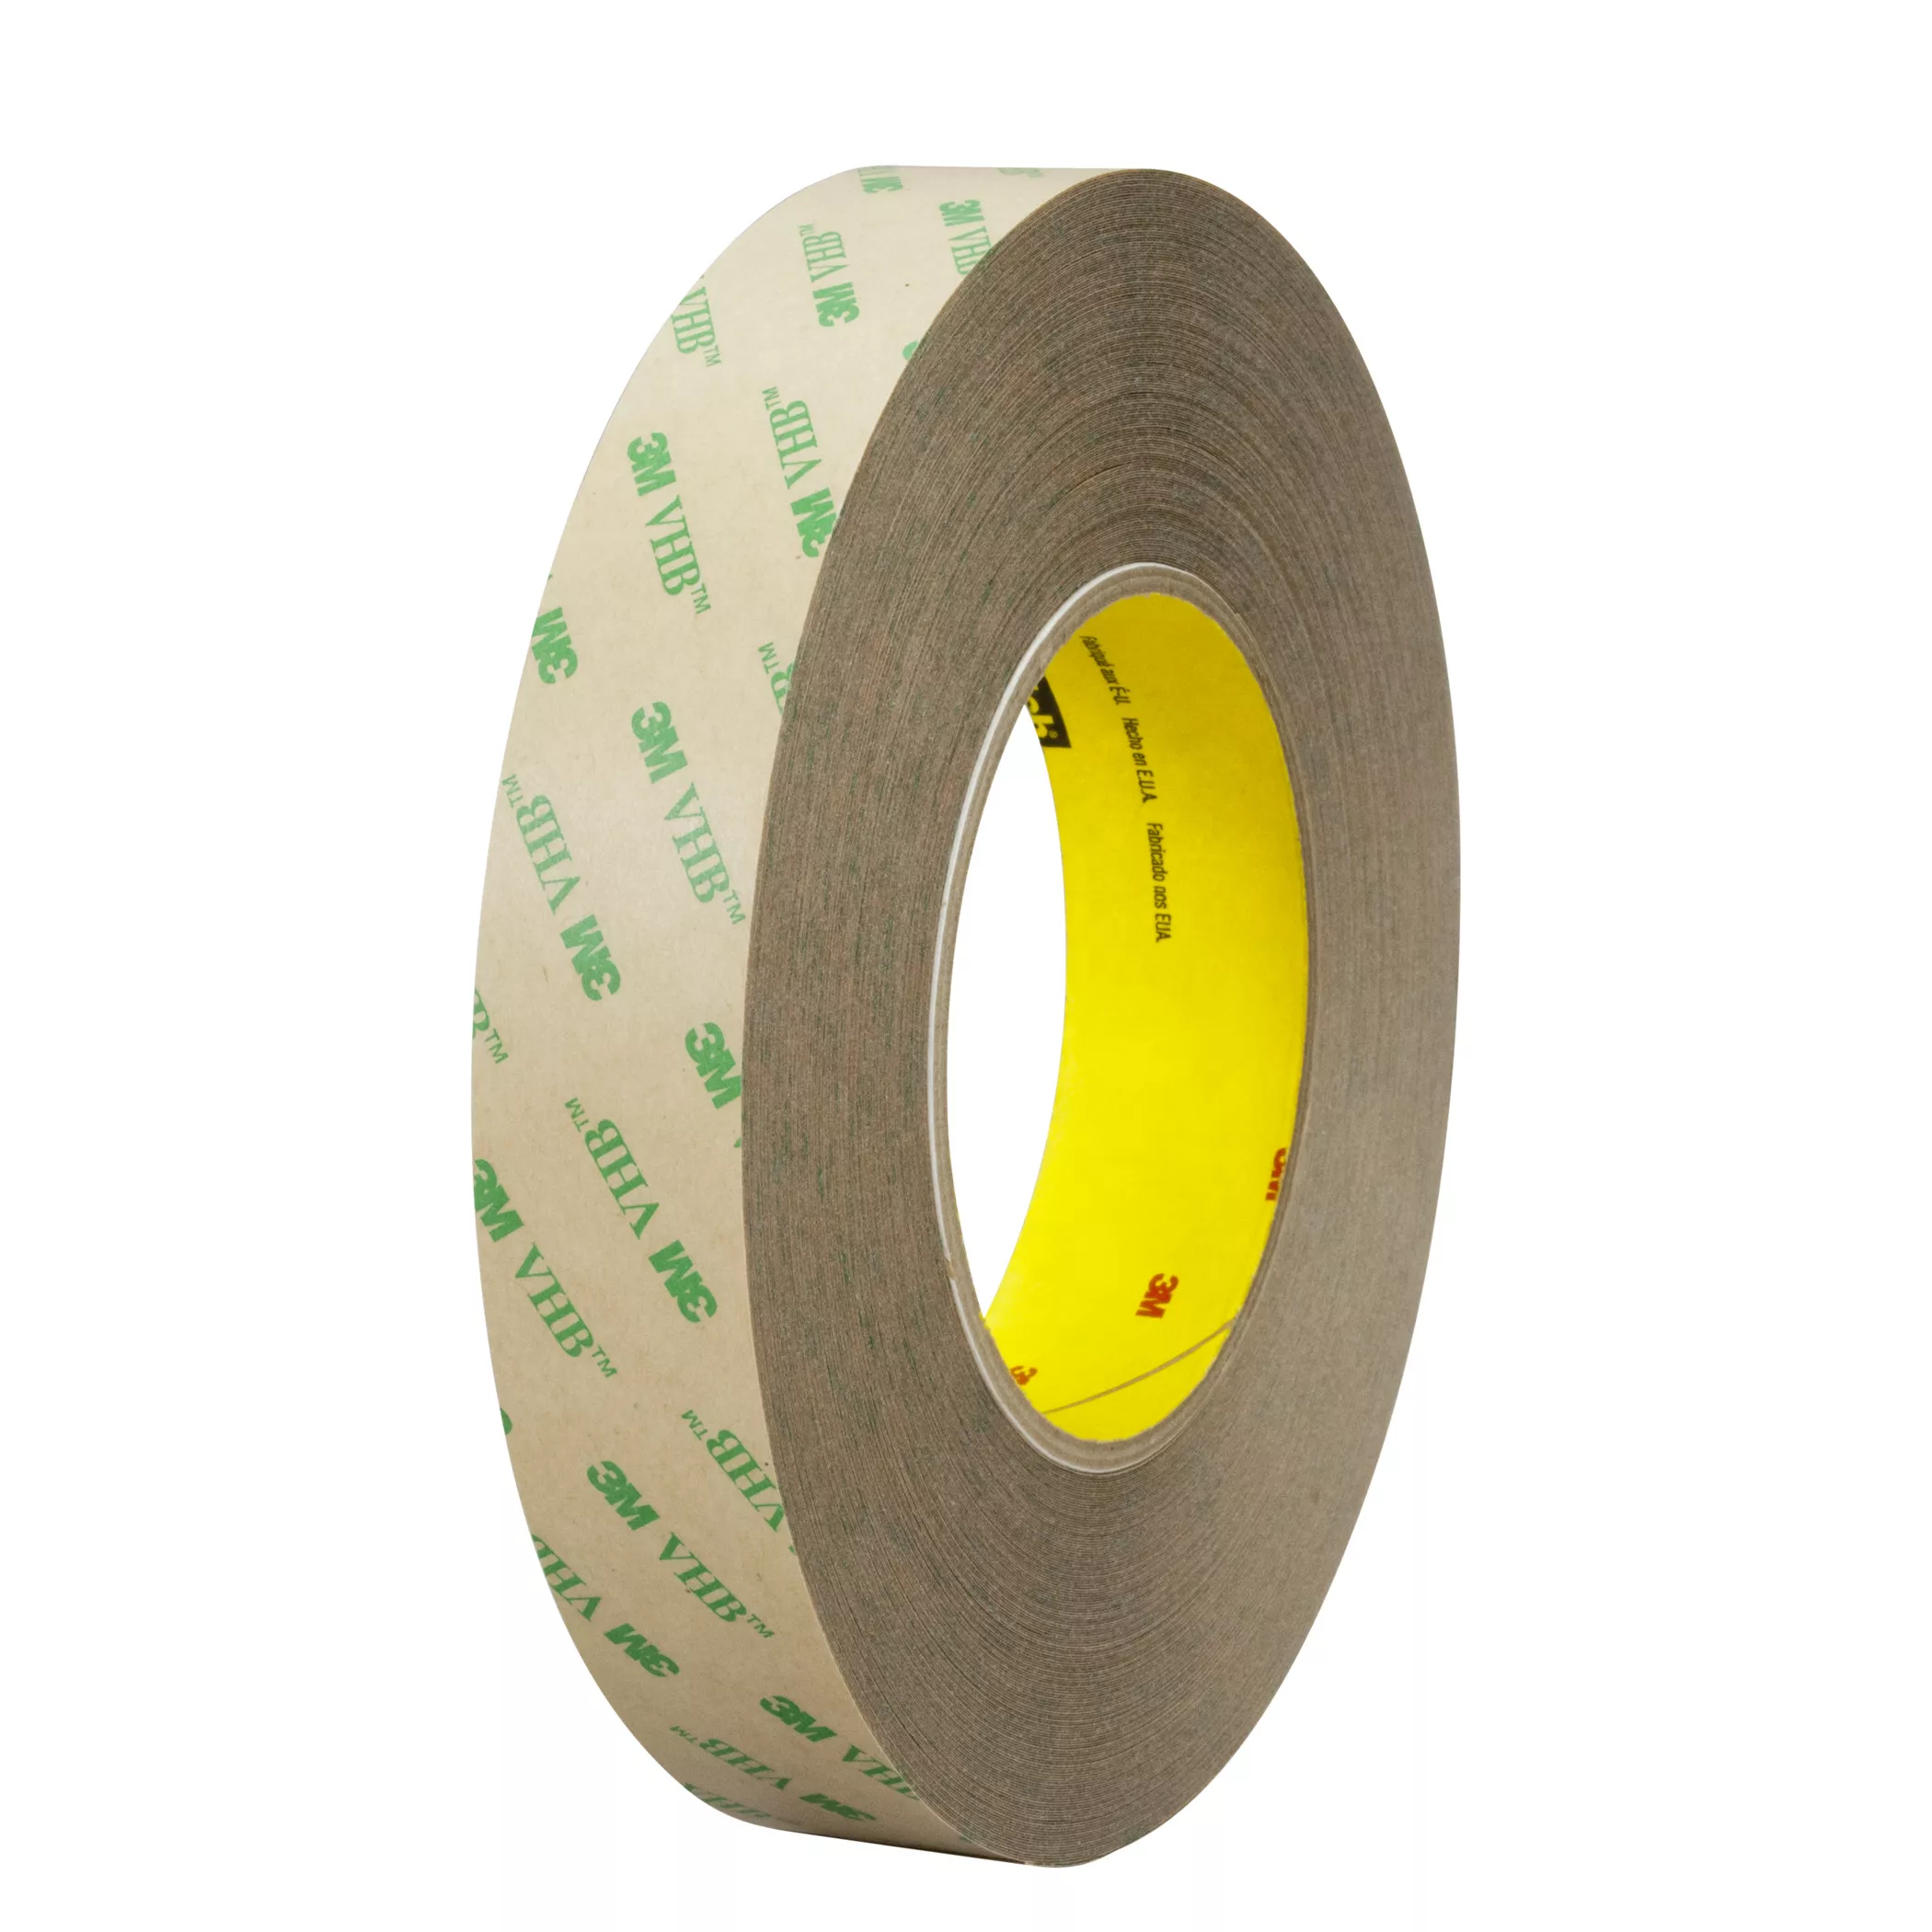 3M™ VHB™ Adhesive Transfer Tape F9469PC, Clear, 12 in x 180 yd, 5 mil, 1
Roll/Case